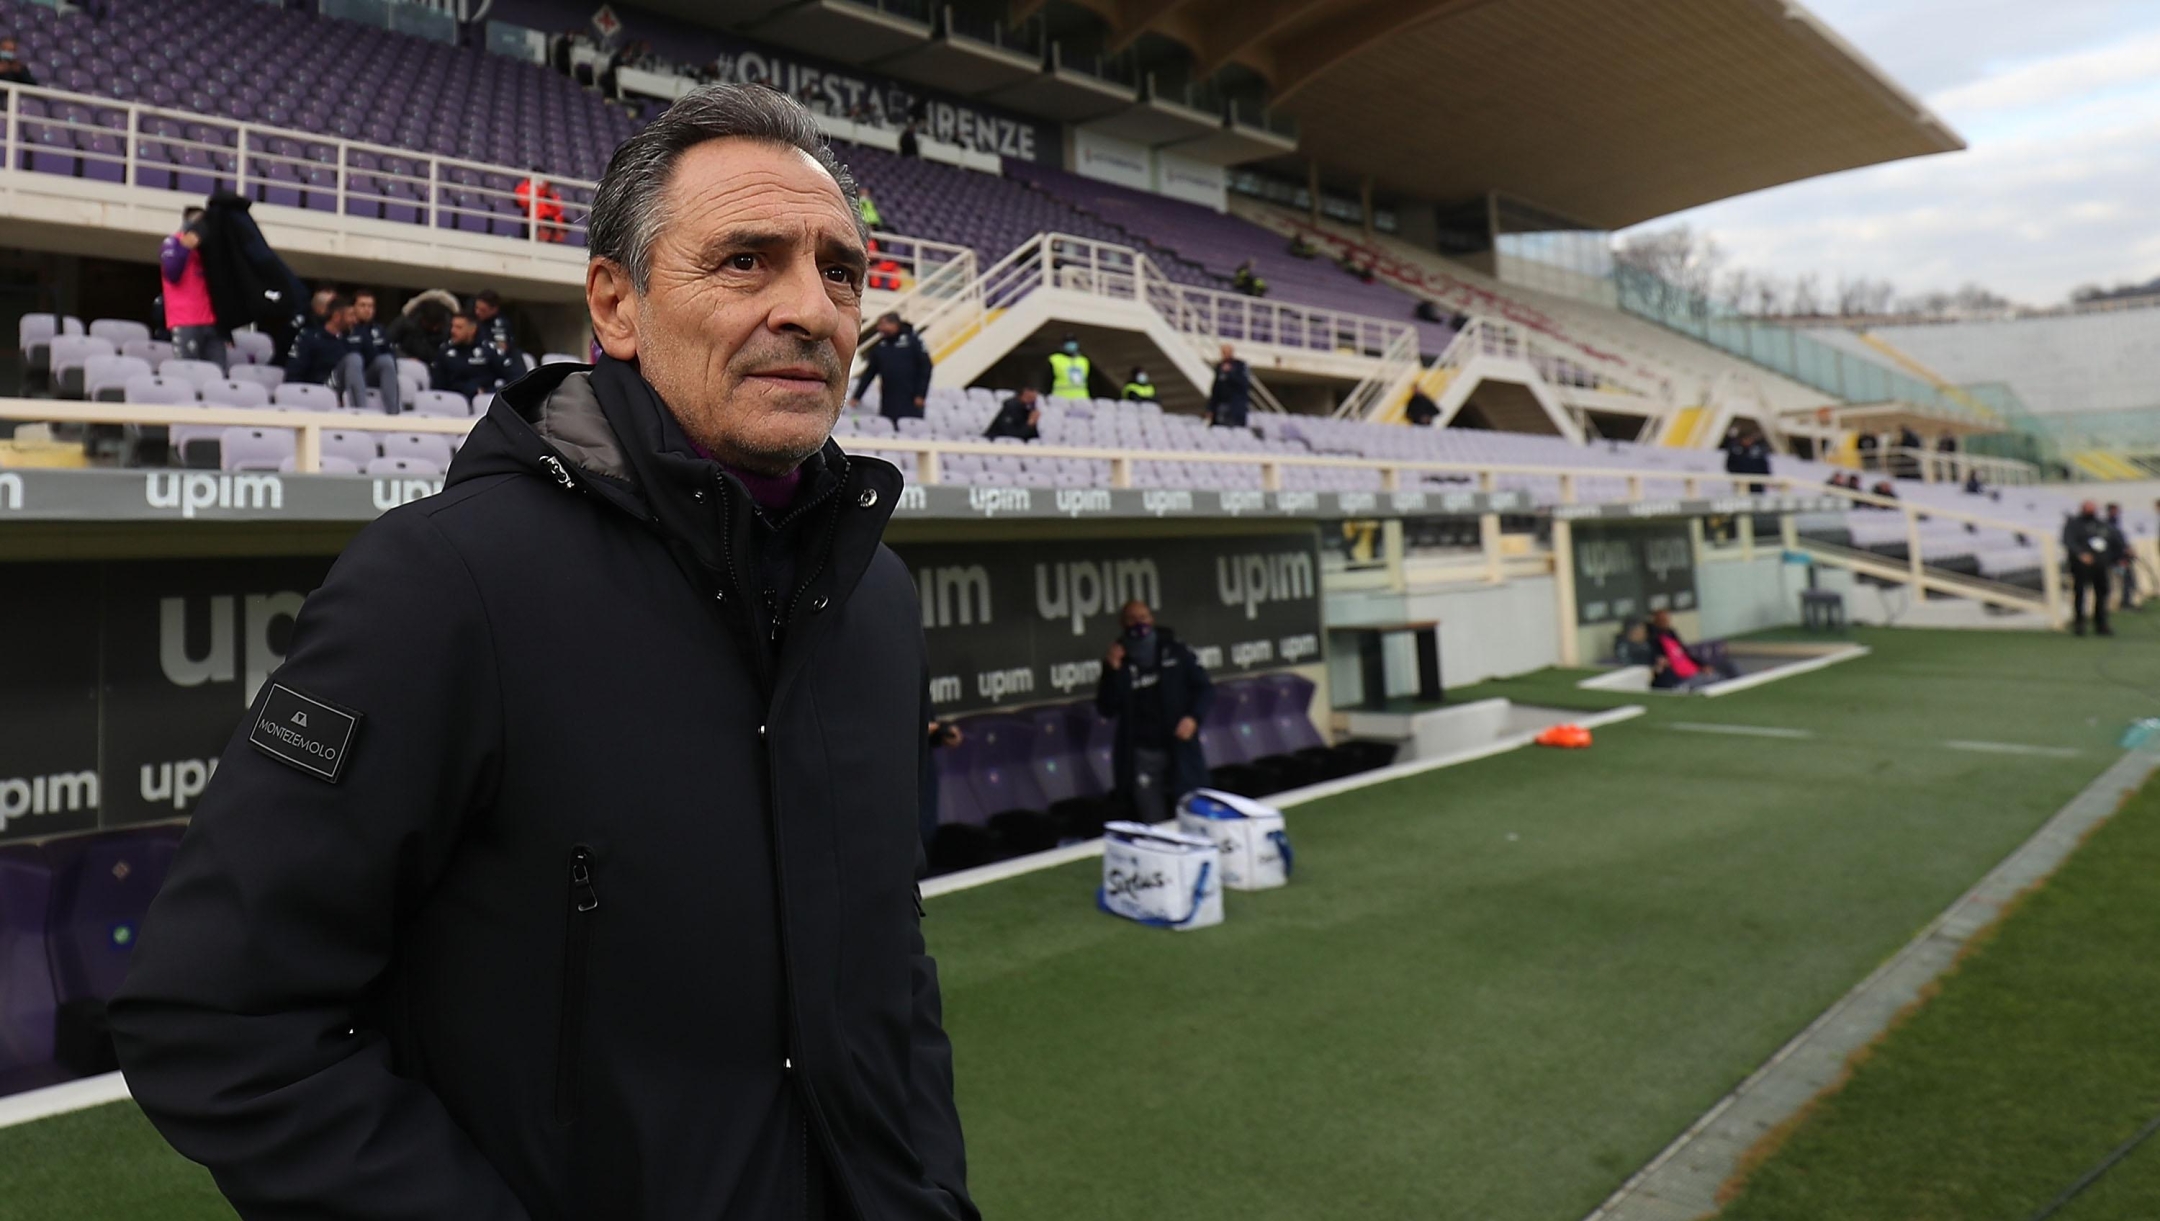 FLORENCE, ITALY - DECEMBER 19: Cesare Prandelli manager of ACF Fiorentina looks on prior the Serie A match between ACF Fiorentina and Hellas Verona FC at Stadio Artemio Franchi on December 19, 2020 in Florence, Italy.  (Photo by Gabriele Maltinti/Getty Images)